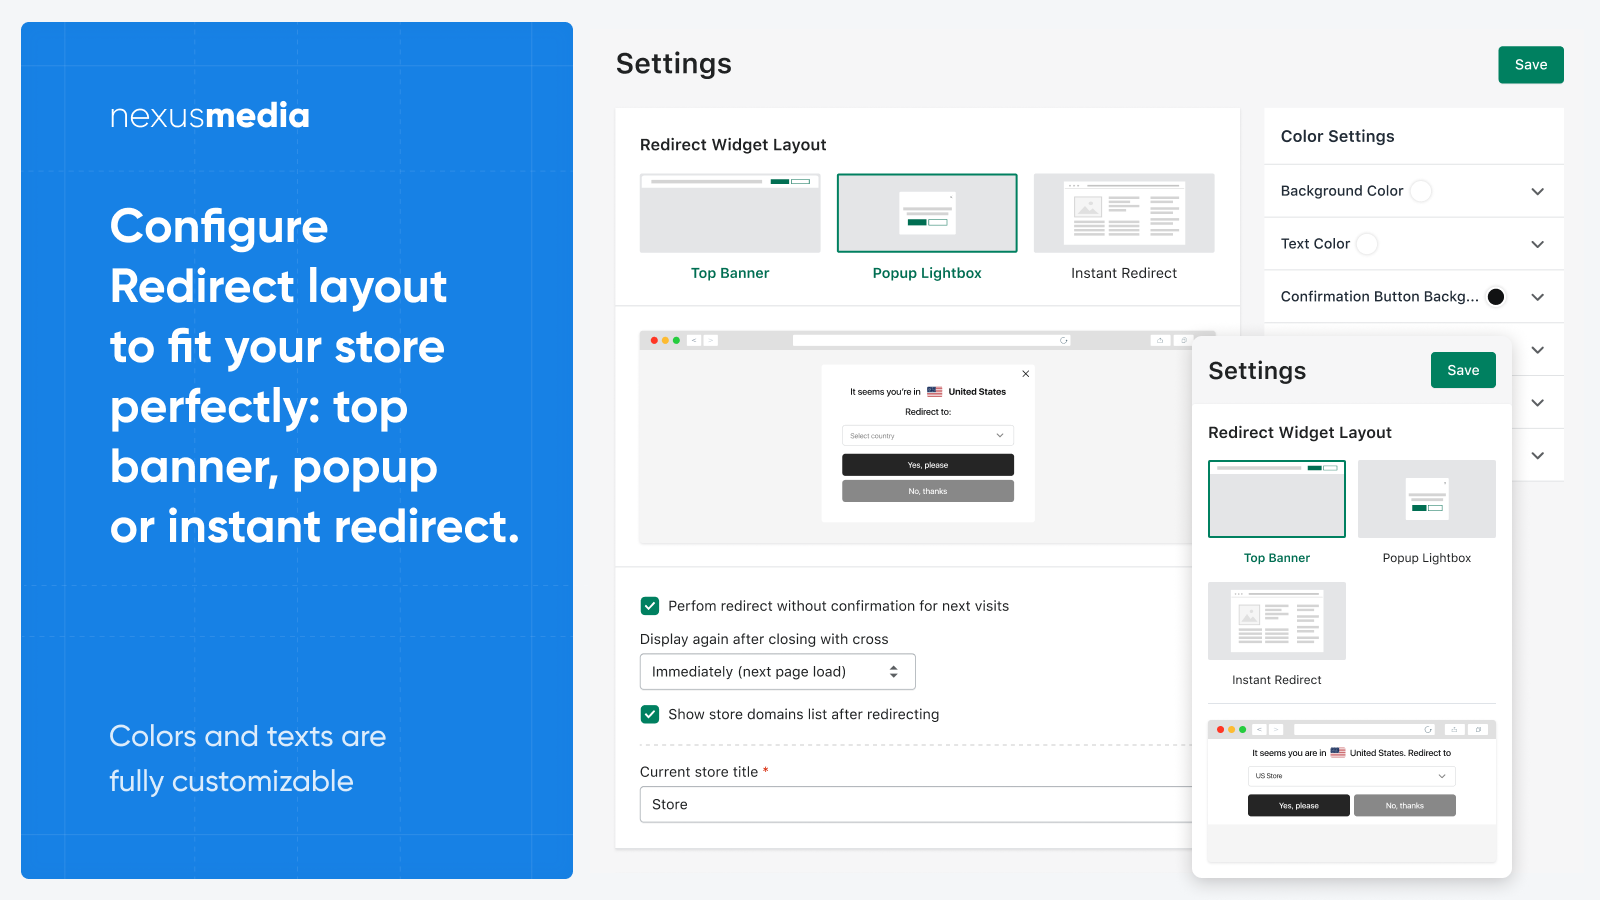 Customize redirect layout to fit your needs